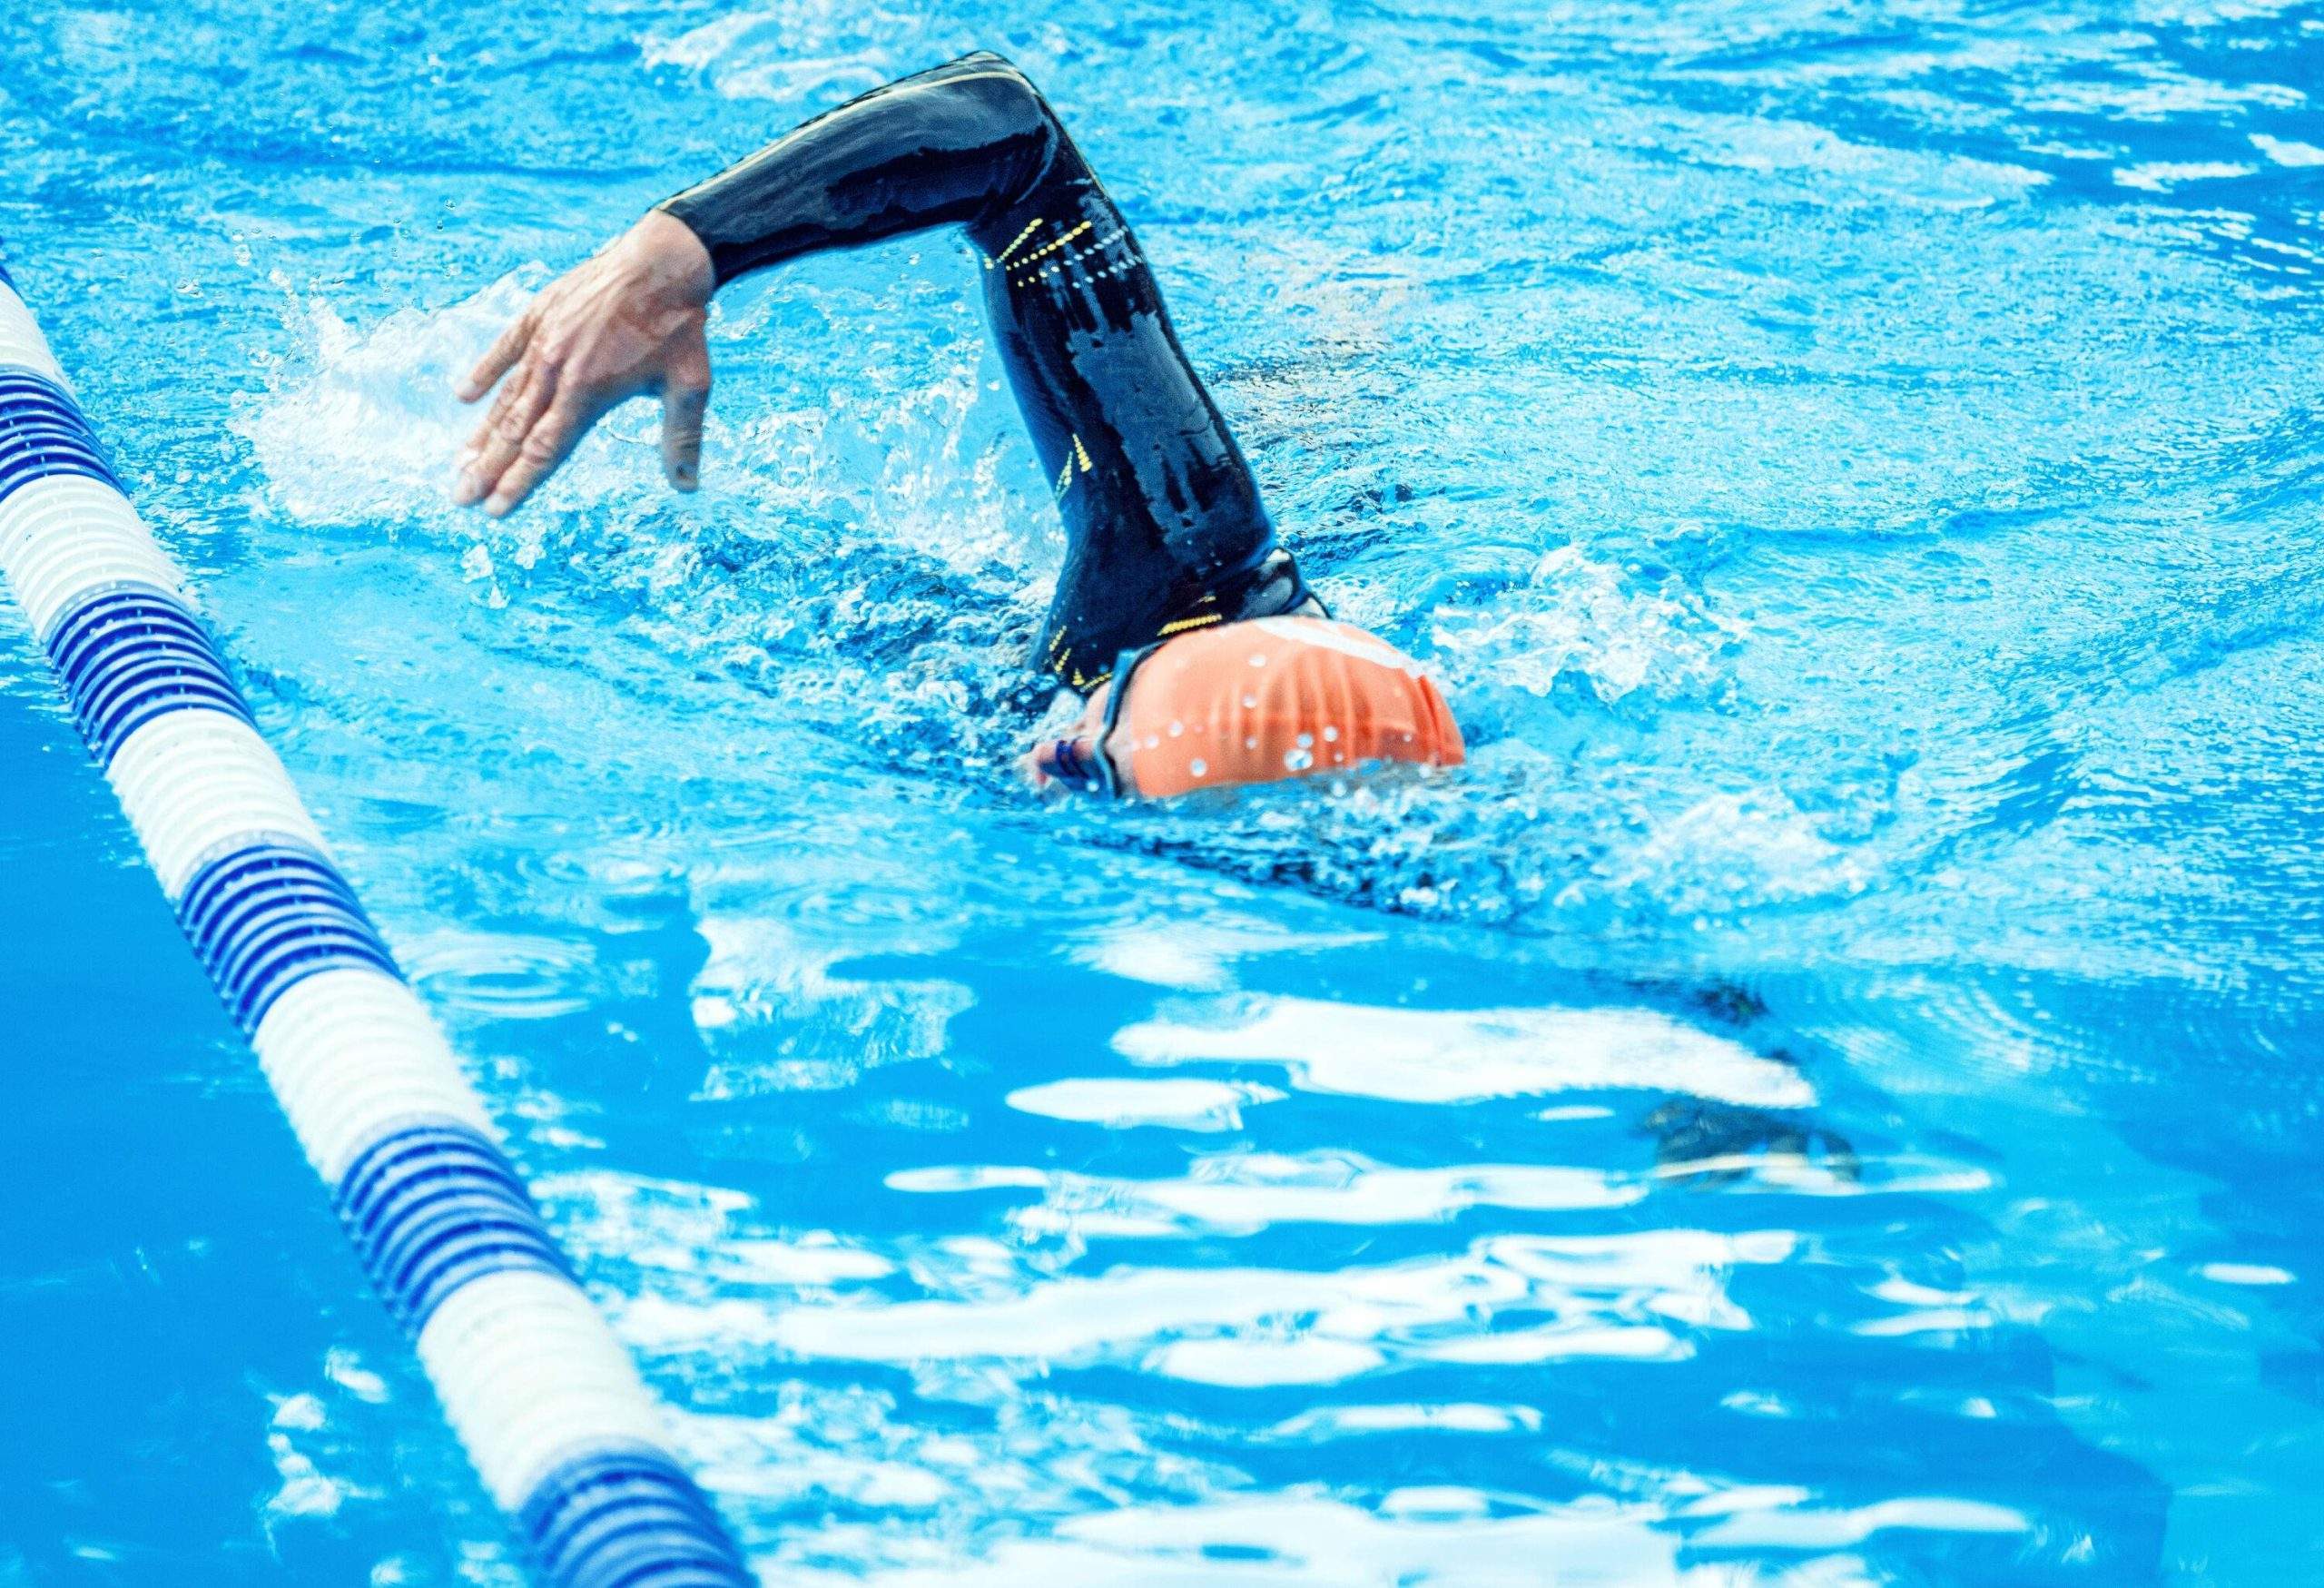 A professional swimmer training in a swimming pool.